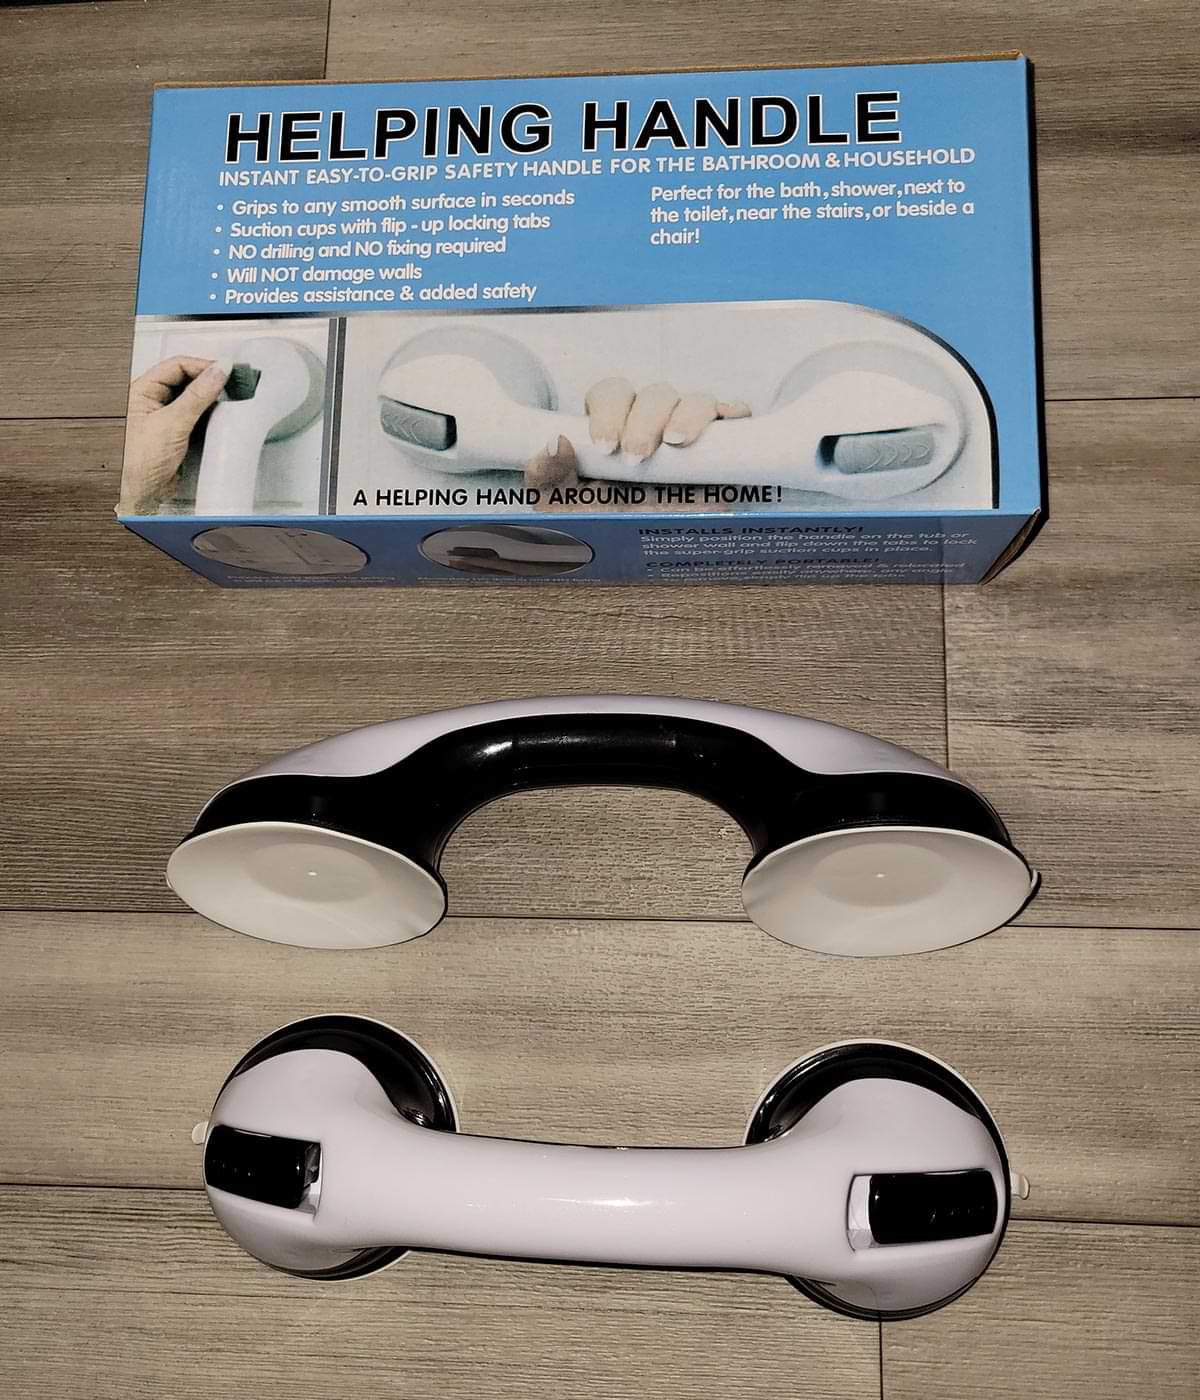 the Helping Handle gadget placed beside its packaging box